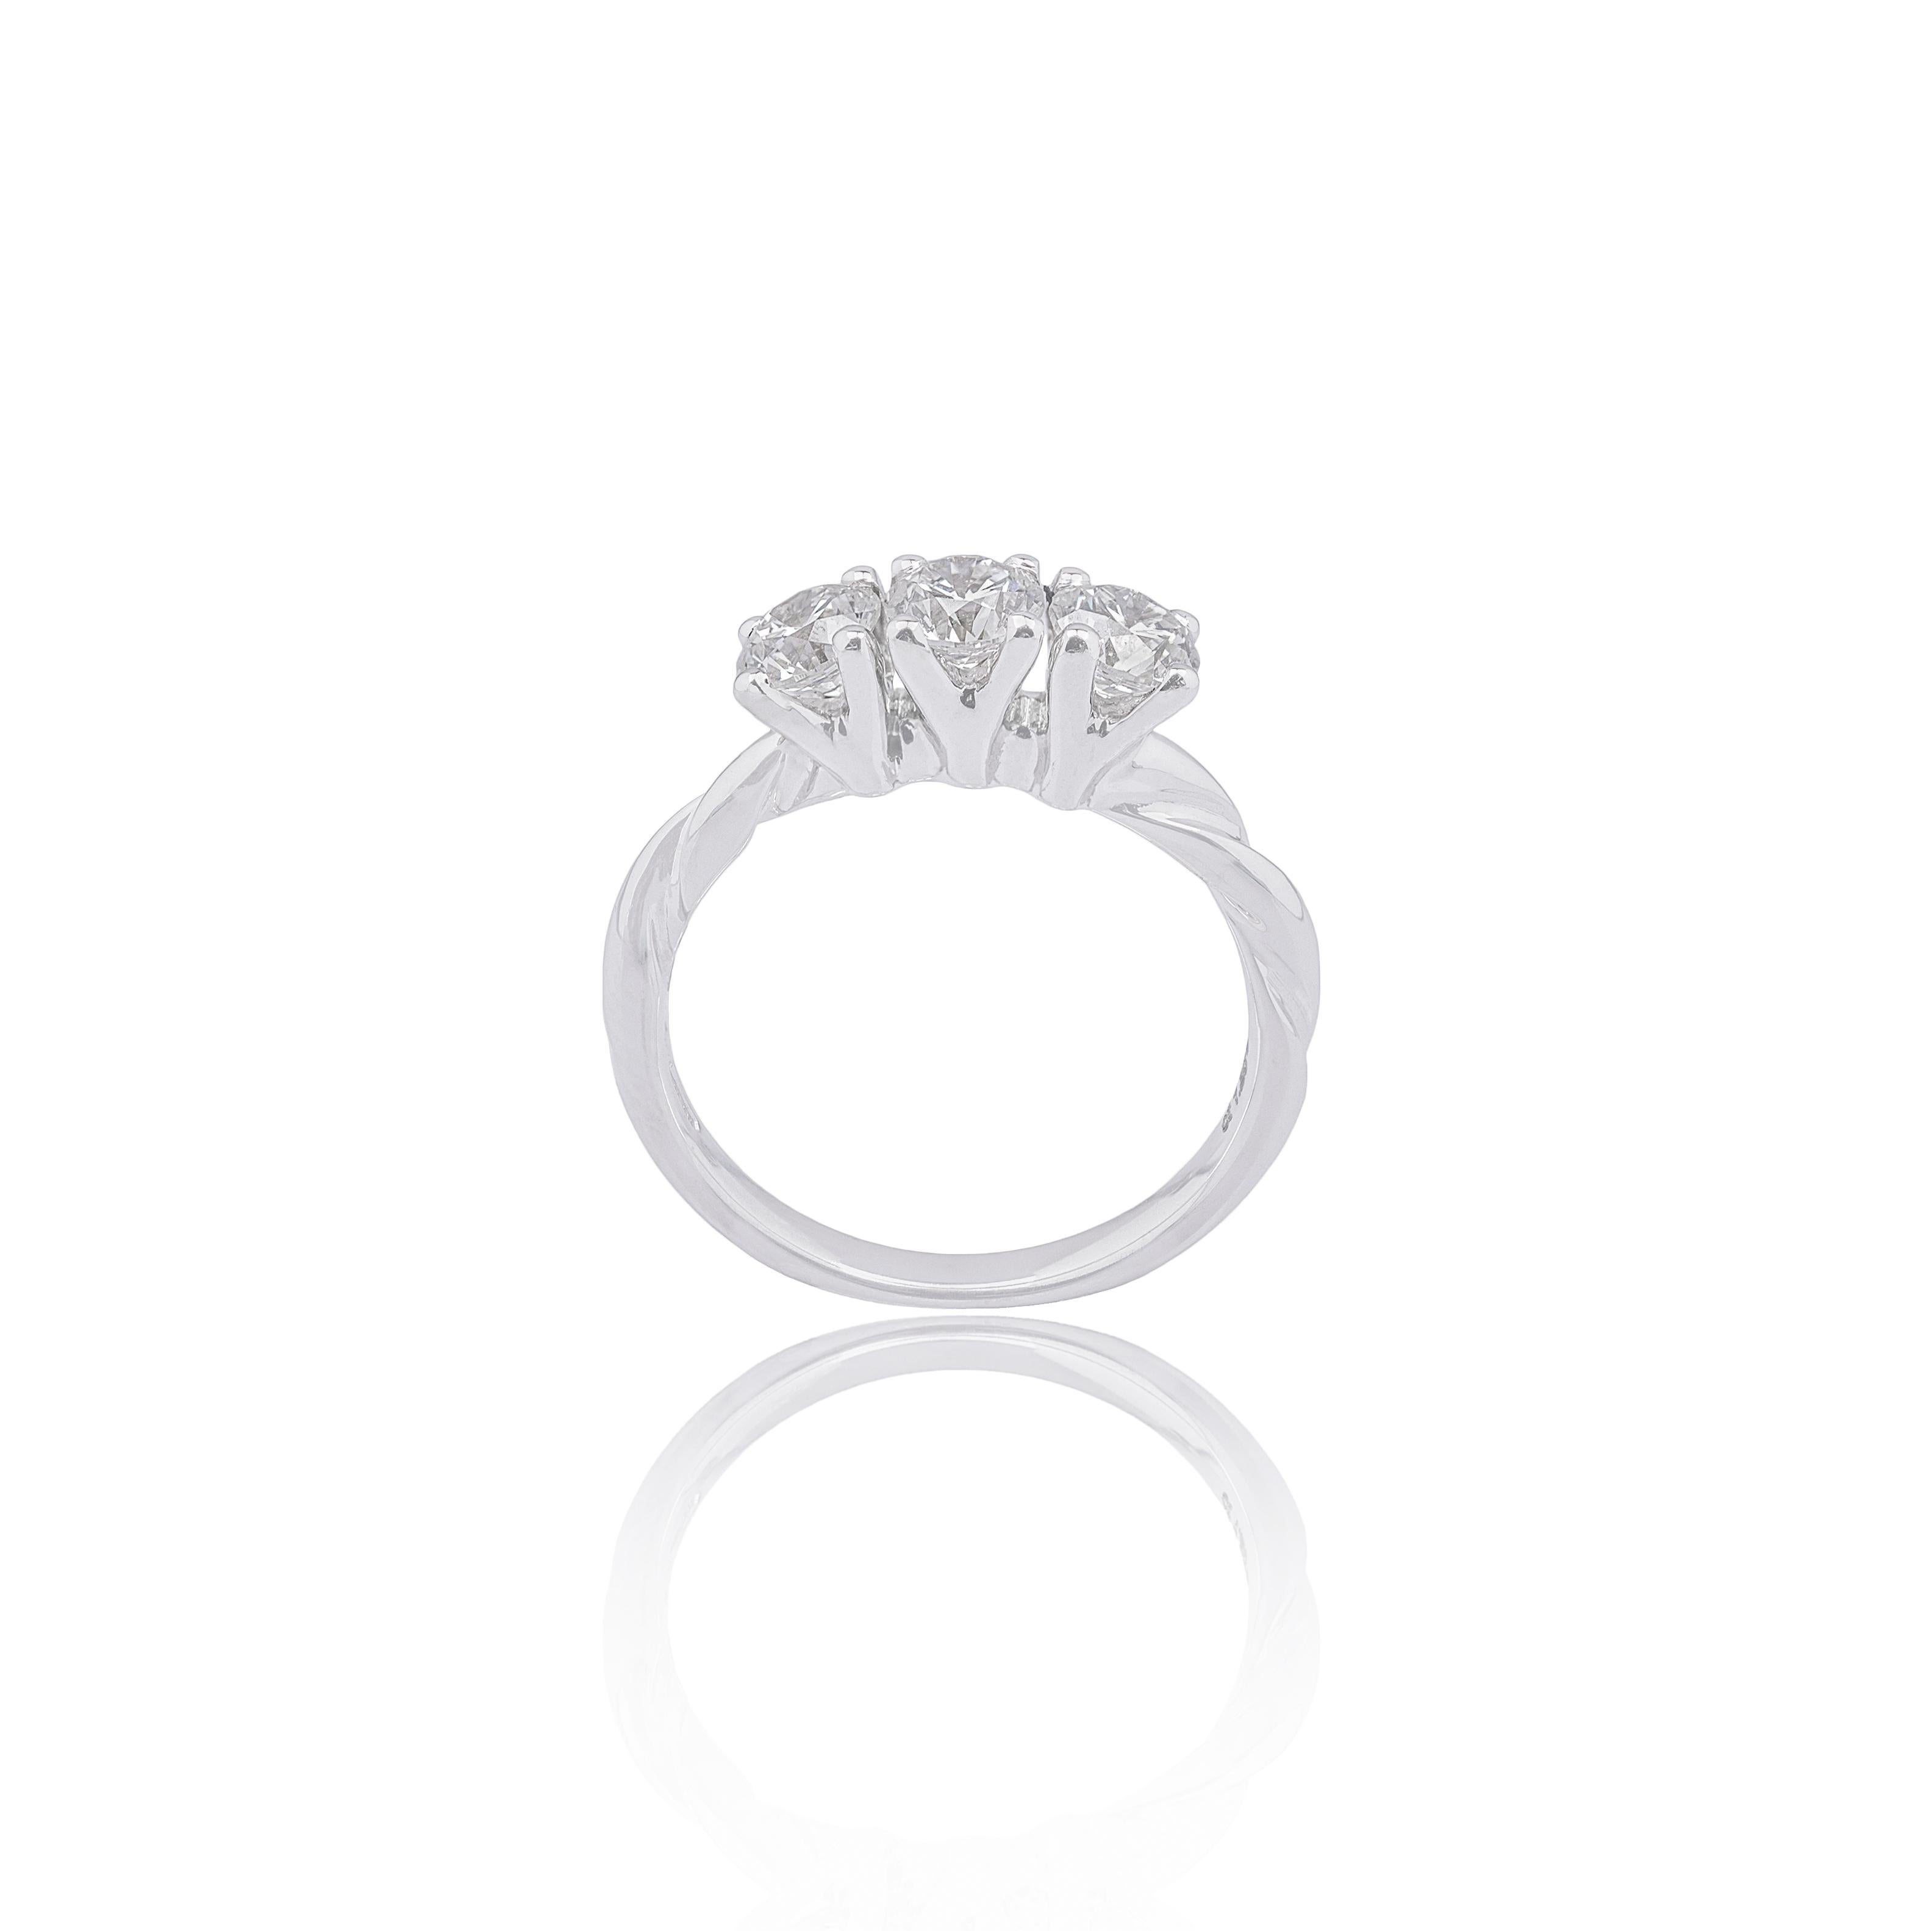 For Sale:  1.28ct Brilliant Cut Diamonds and 18k White Gold Trilogy Ring  4